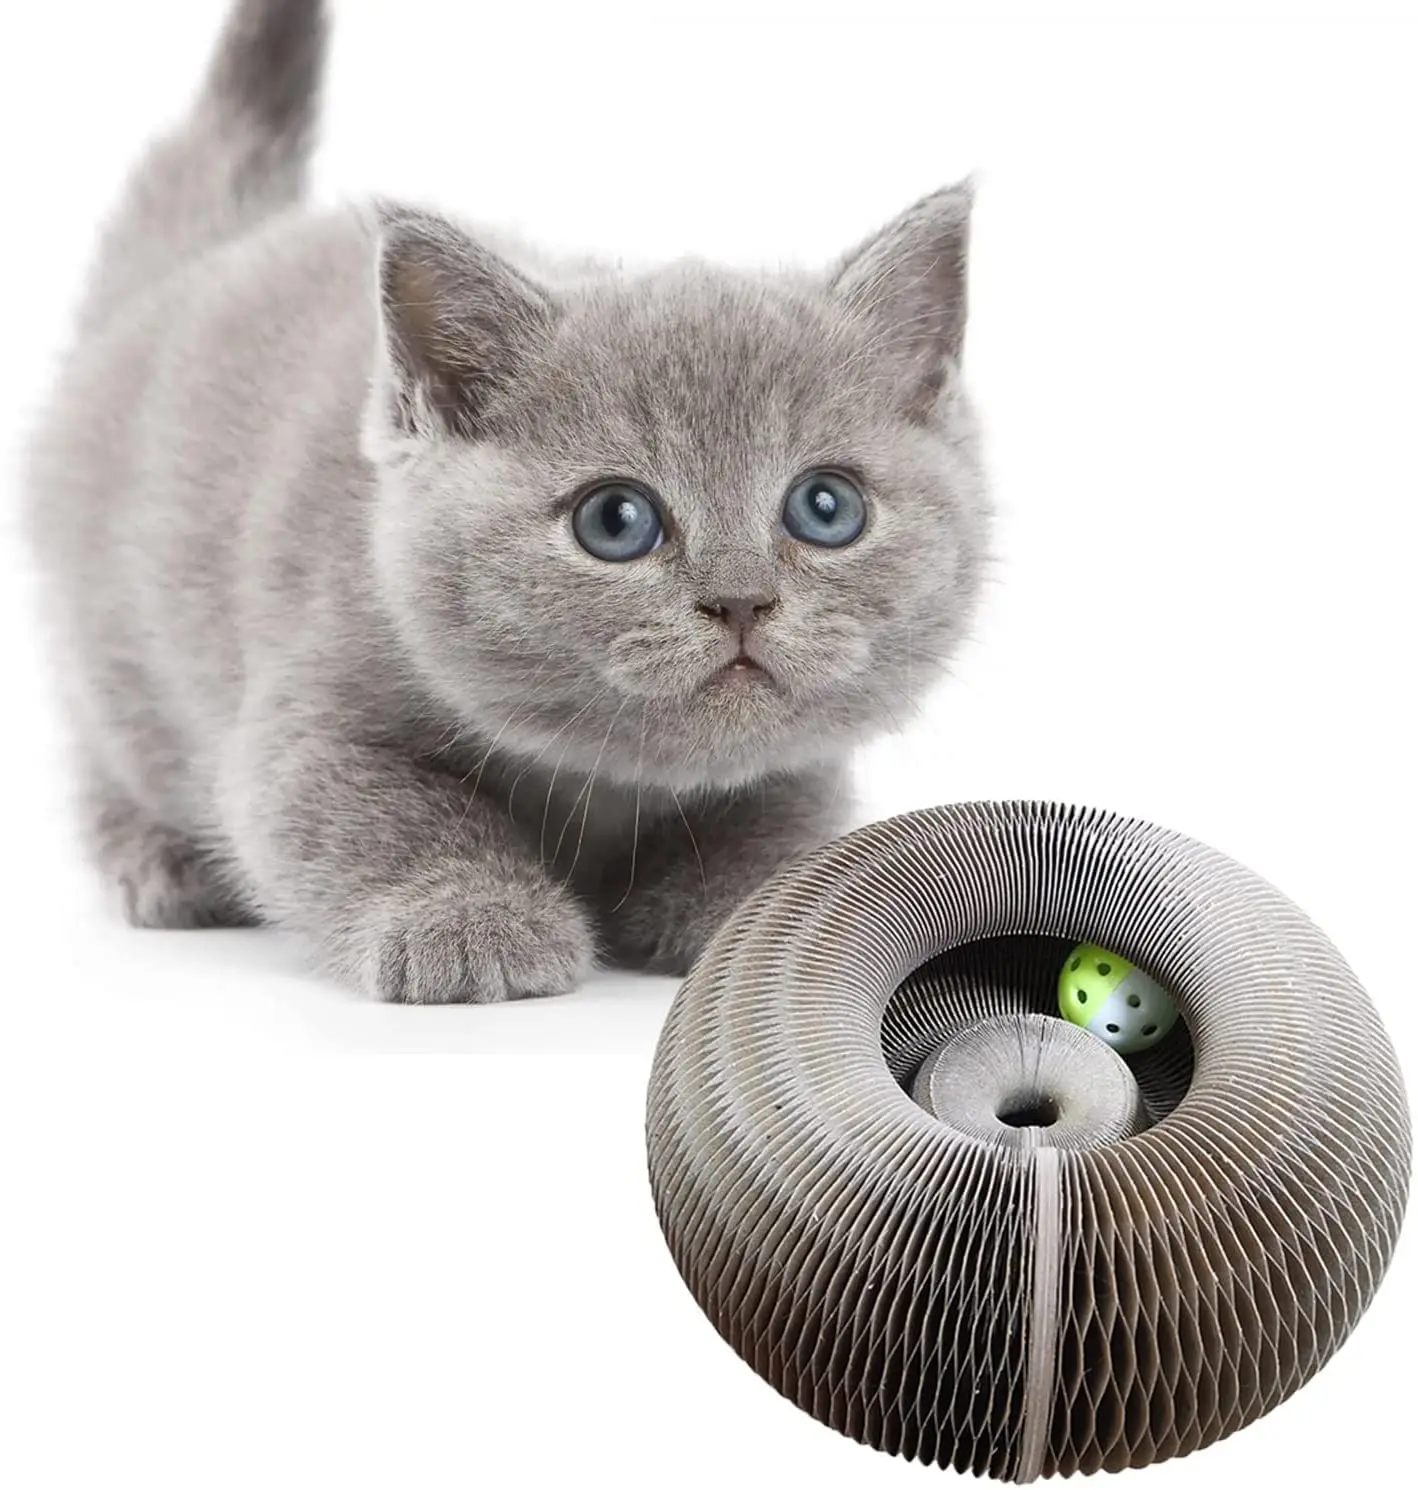 

Magic Organ Cat Scratching Board-Comes with A Toy Bell Ball, Foldable Cardboard Cat Scratcher Convenient Durable Recyclable